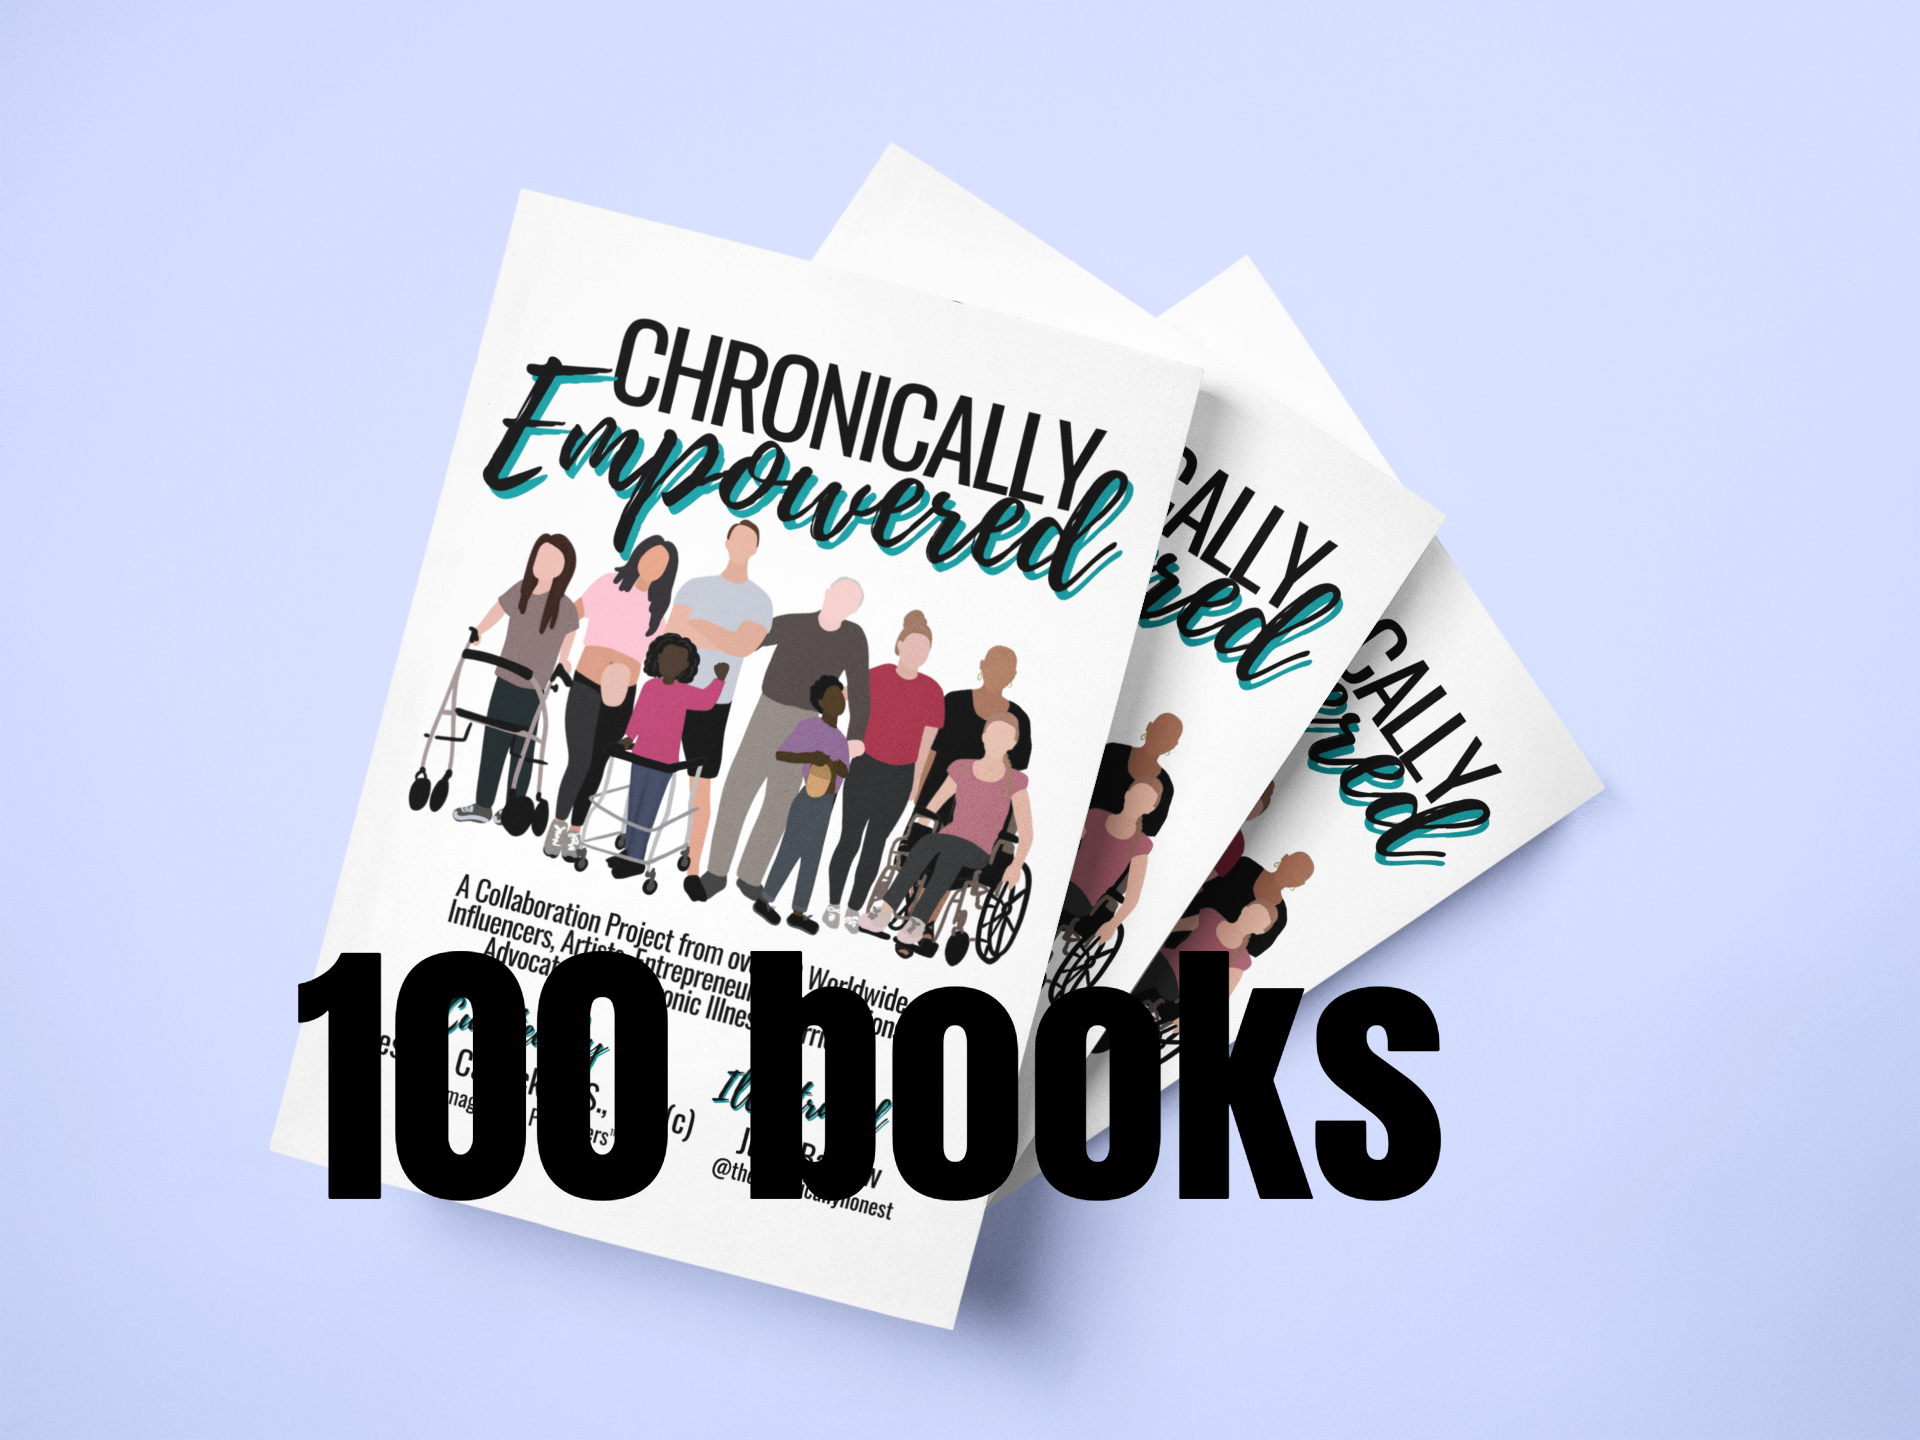 Chronically Empowered WHOLESALE